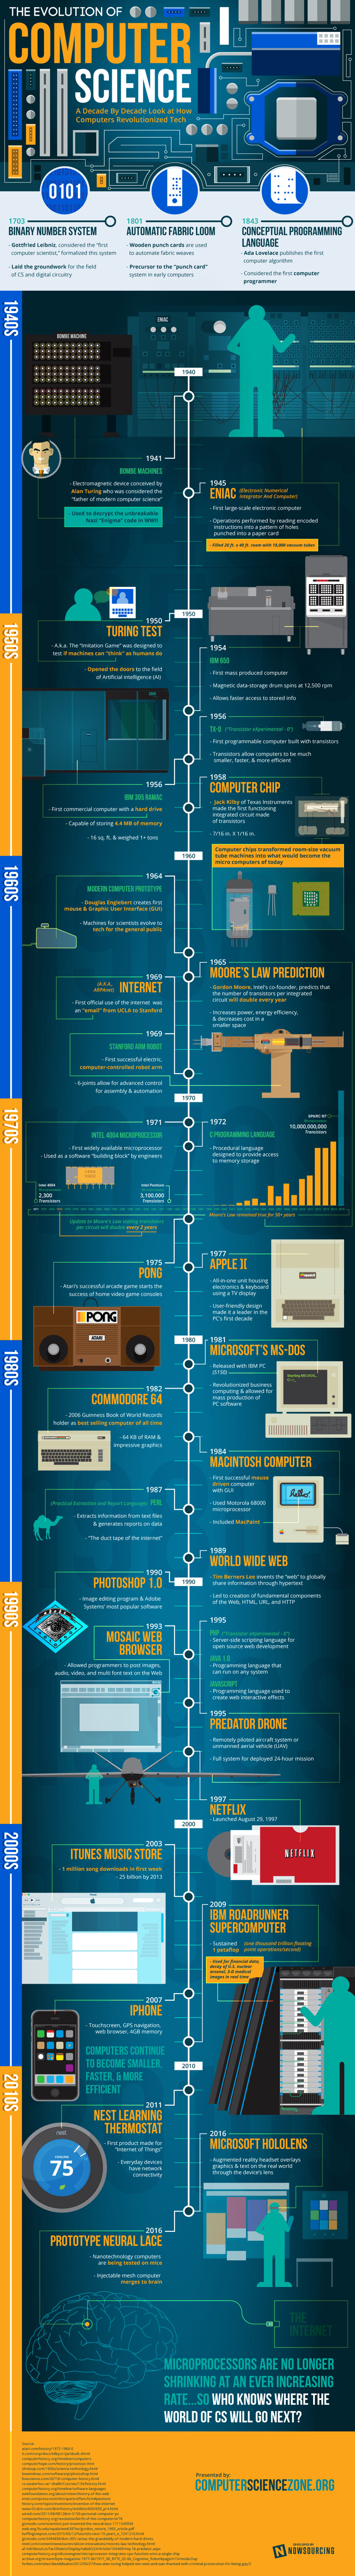 The Evolution of Computer Science Infographic